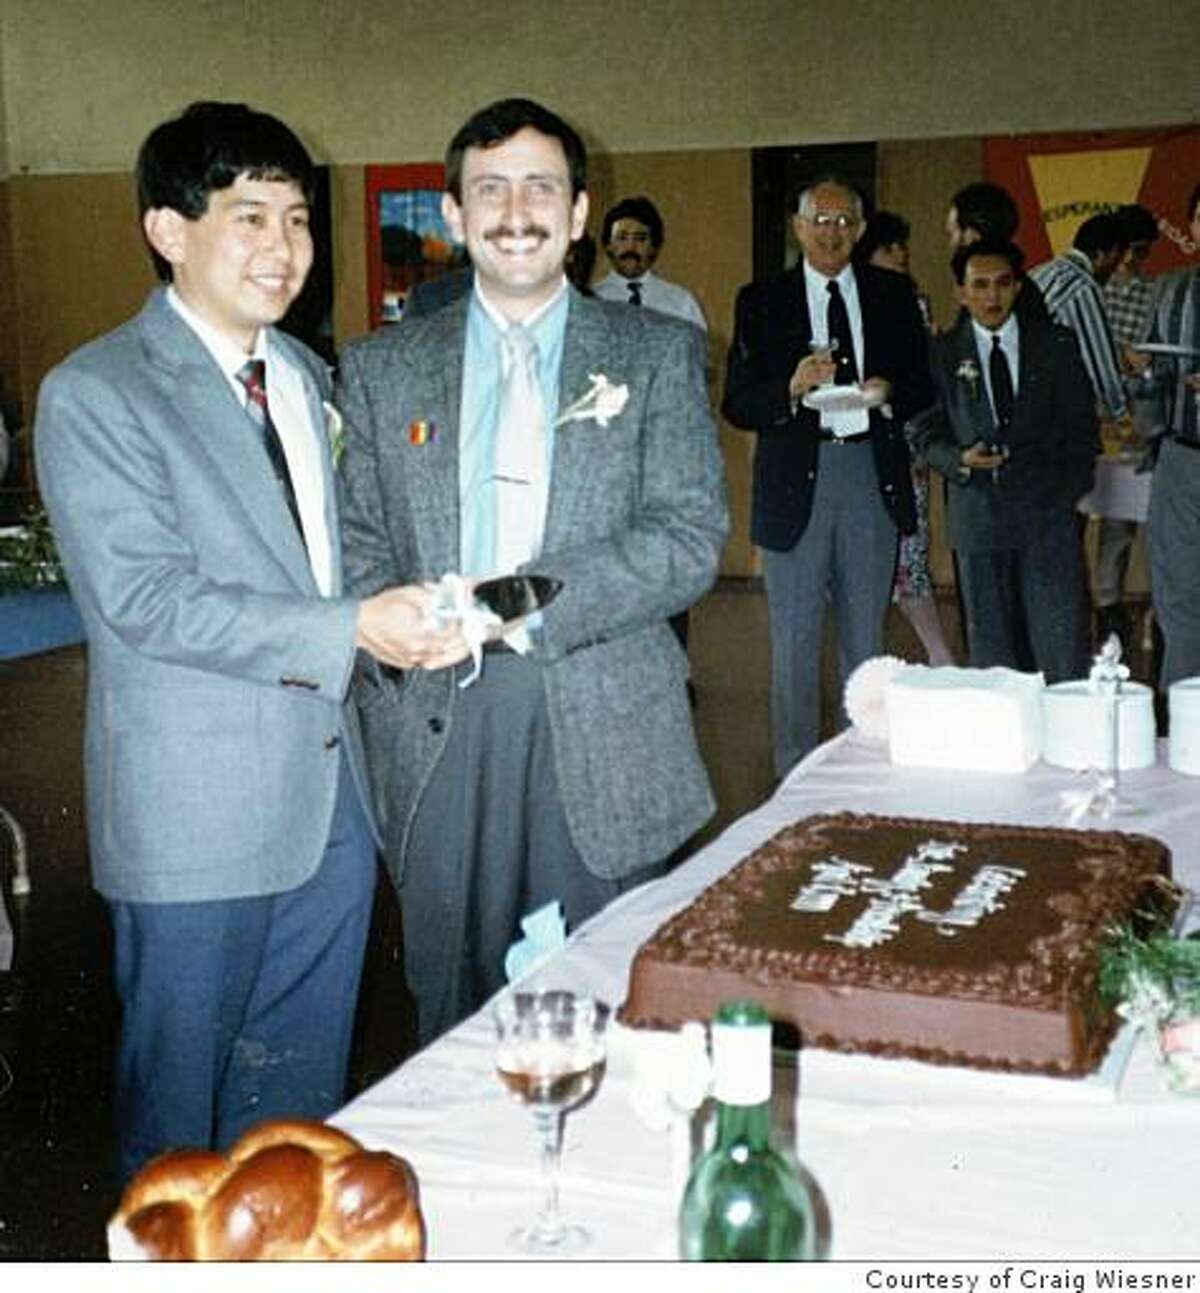 Derrick Kikuchi , left, and Craig Wiesner at their wedding reception at the First Presbyterian Church in Palo Alto on April 8, 1990.Courtesy of Craig Wiesner